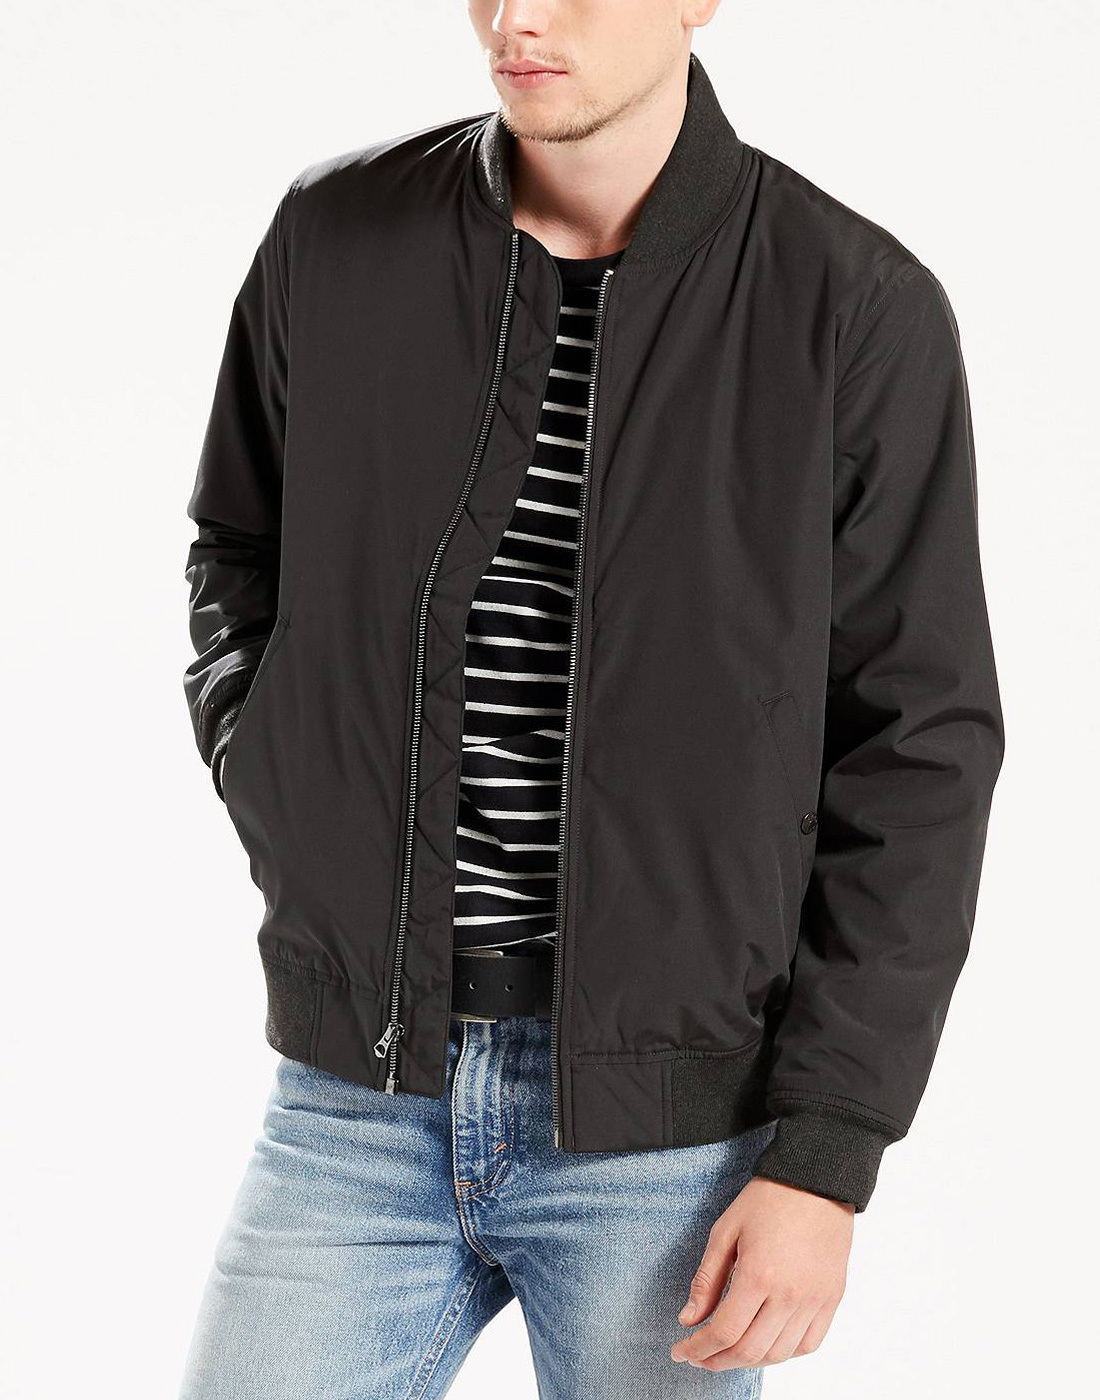 Thermore Retro Indie Mod Bomber Jacket 